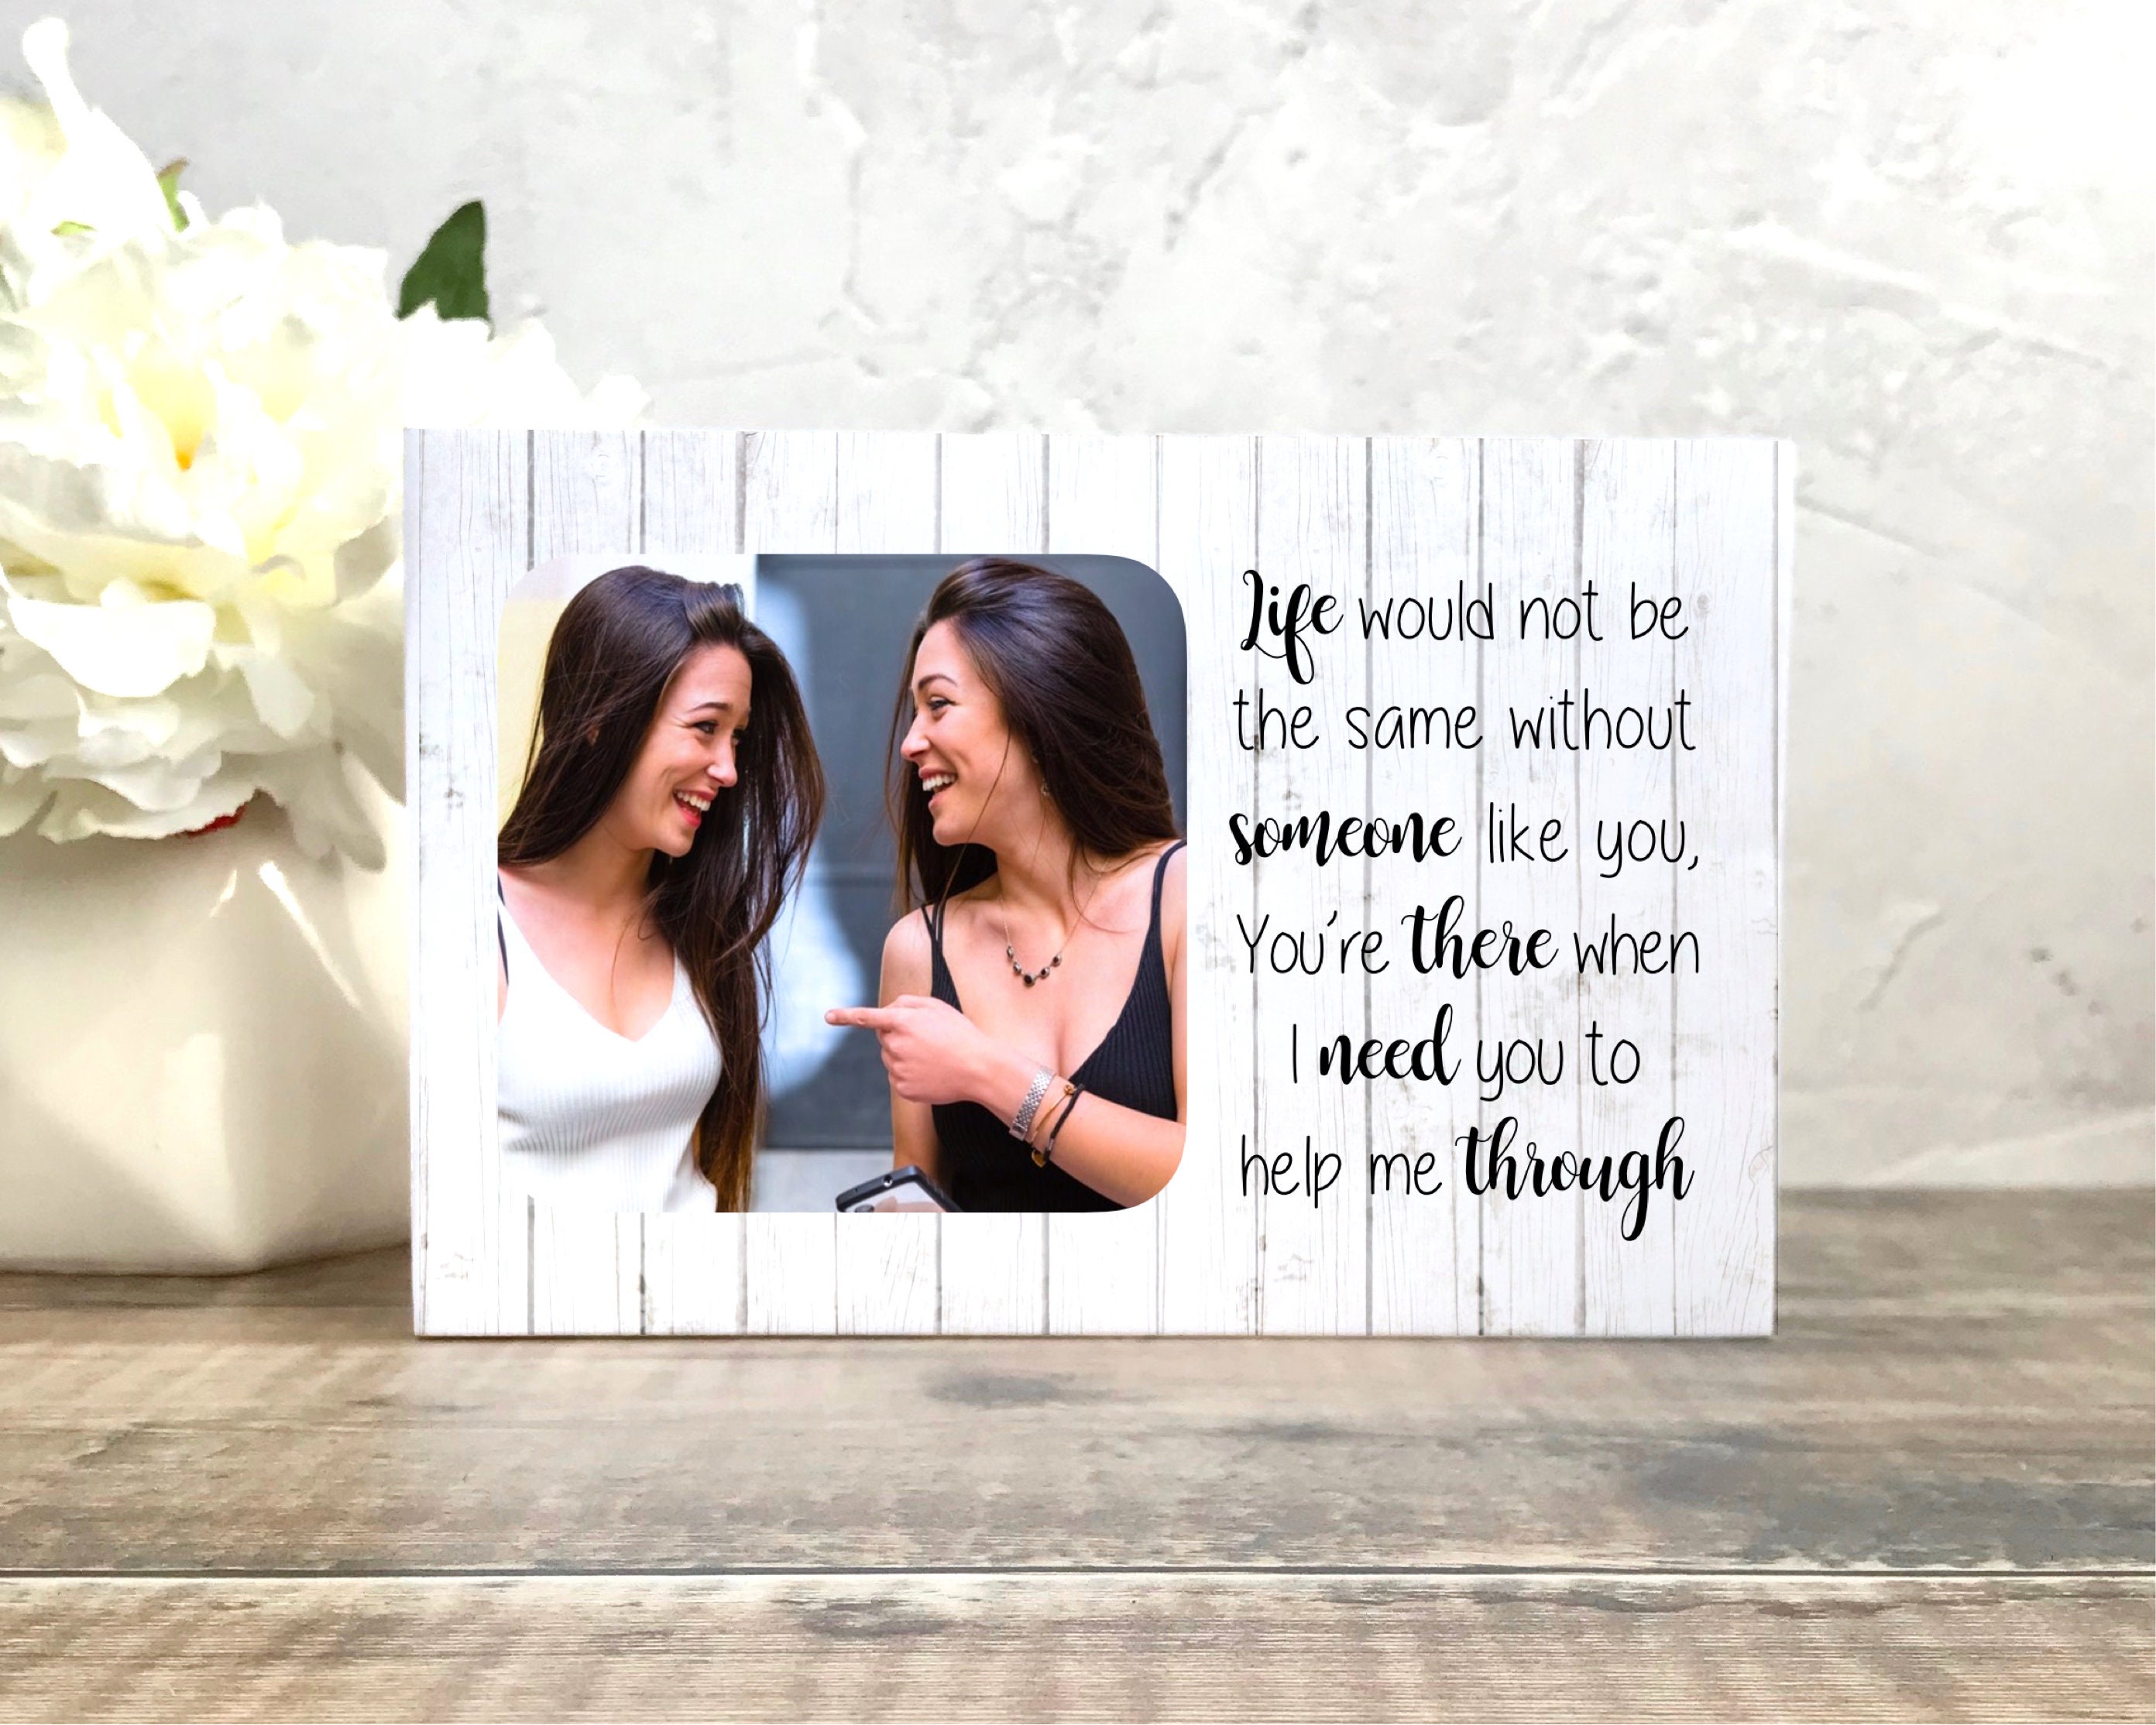 Funny Best Friend Birthday Gift, Gifts for Friends, Friend Photo Frame,  Custom